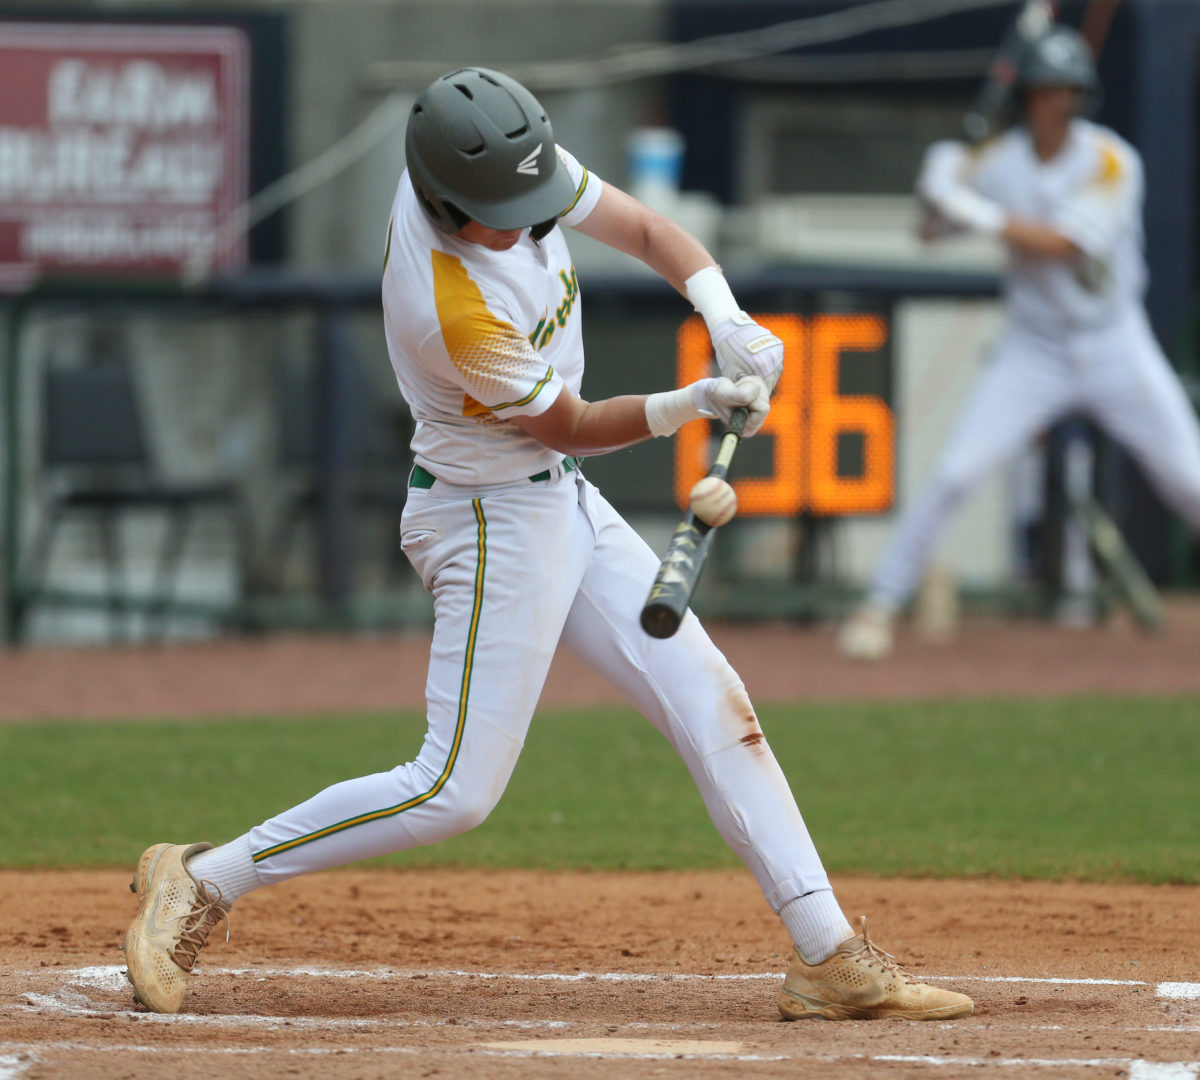 Taylorsville's Ford Eaton (2) makes contact with the baseball. East Union and Taylorsville played in game 2 of the MHSAA Class 2A Baseball Championship on Friday, June 4, 2021 at Trustmark Park. Photo by Keith Warren